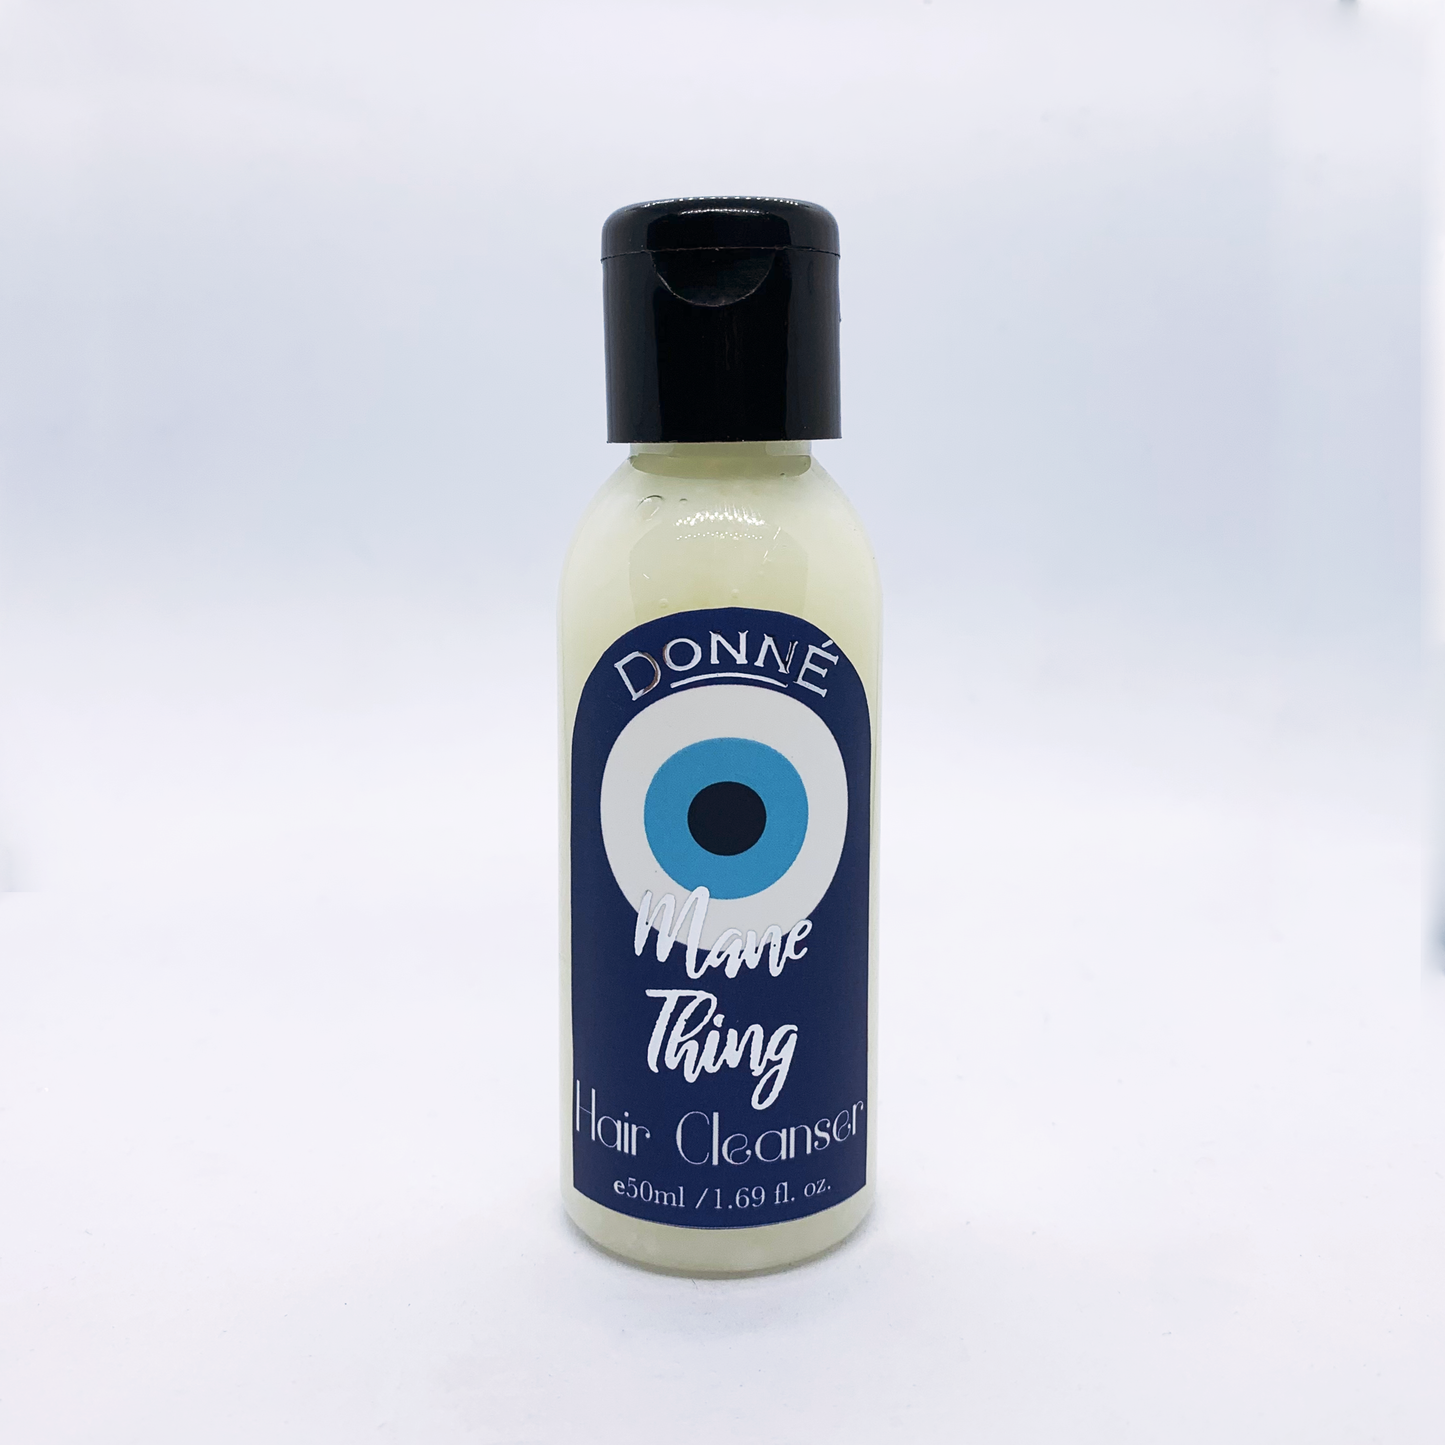 Mane Thing - a shampoo against a white background with a black lid, evil eye labels with silver accents